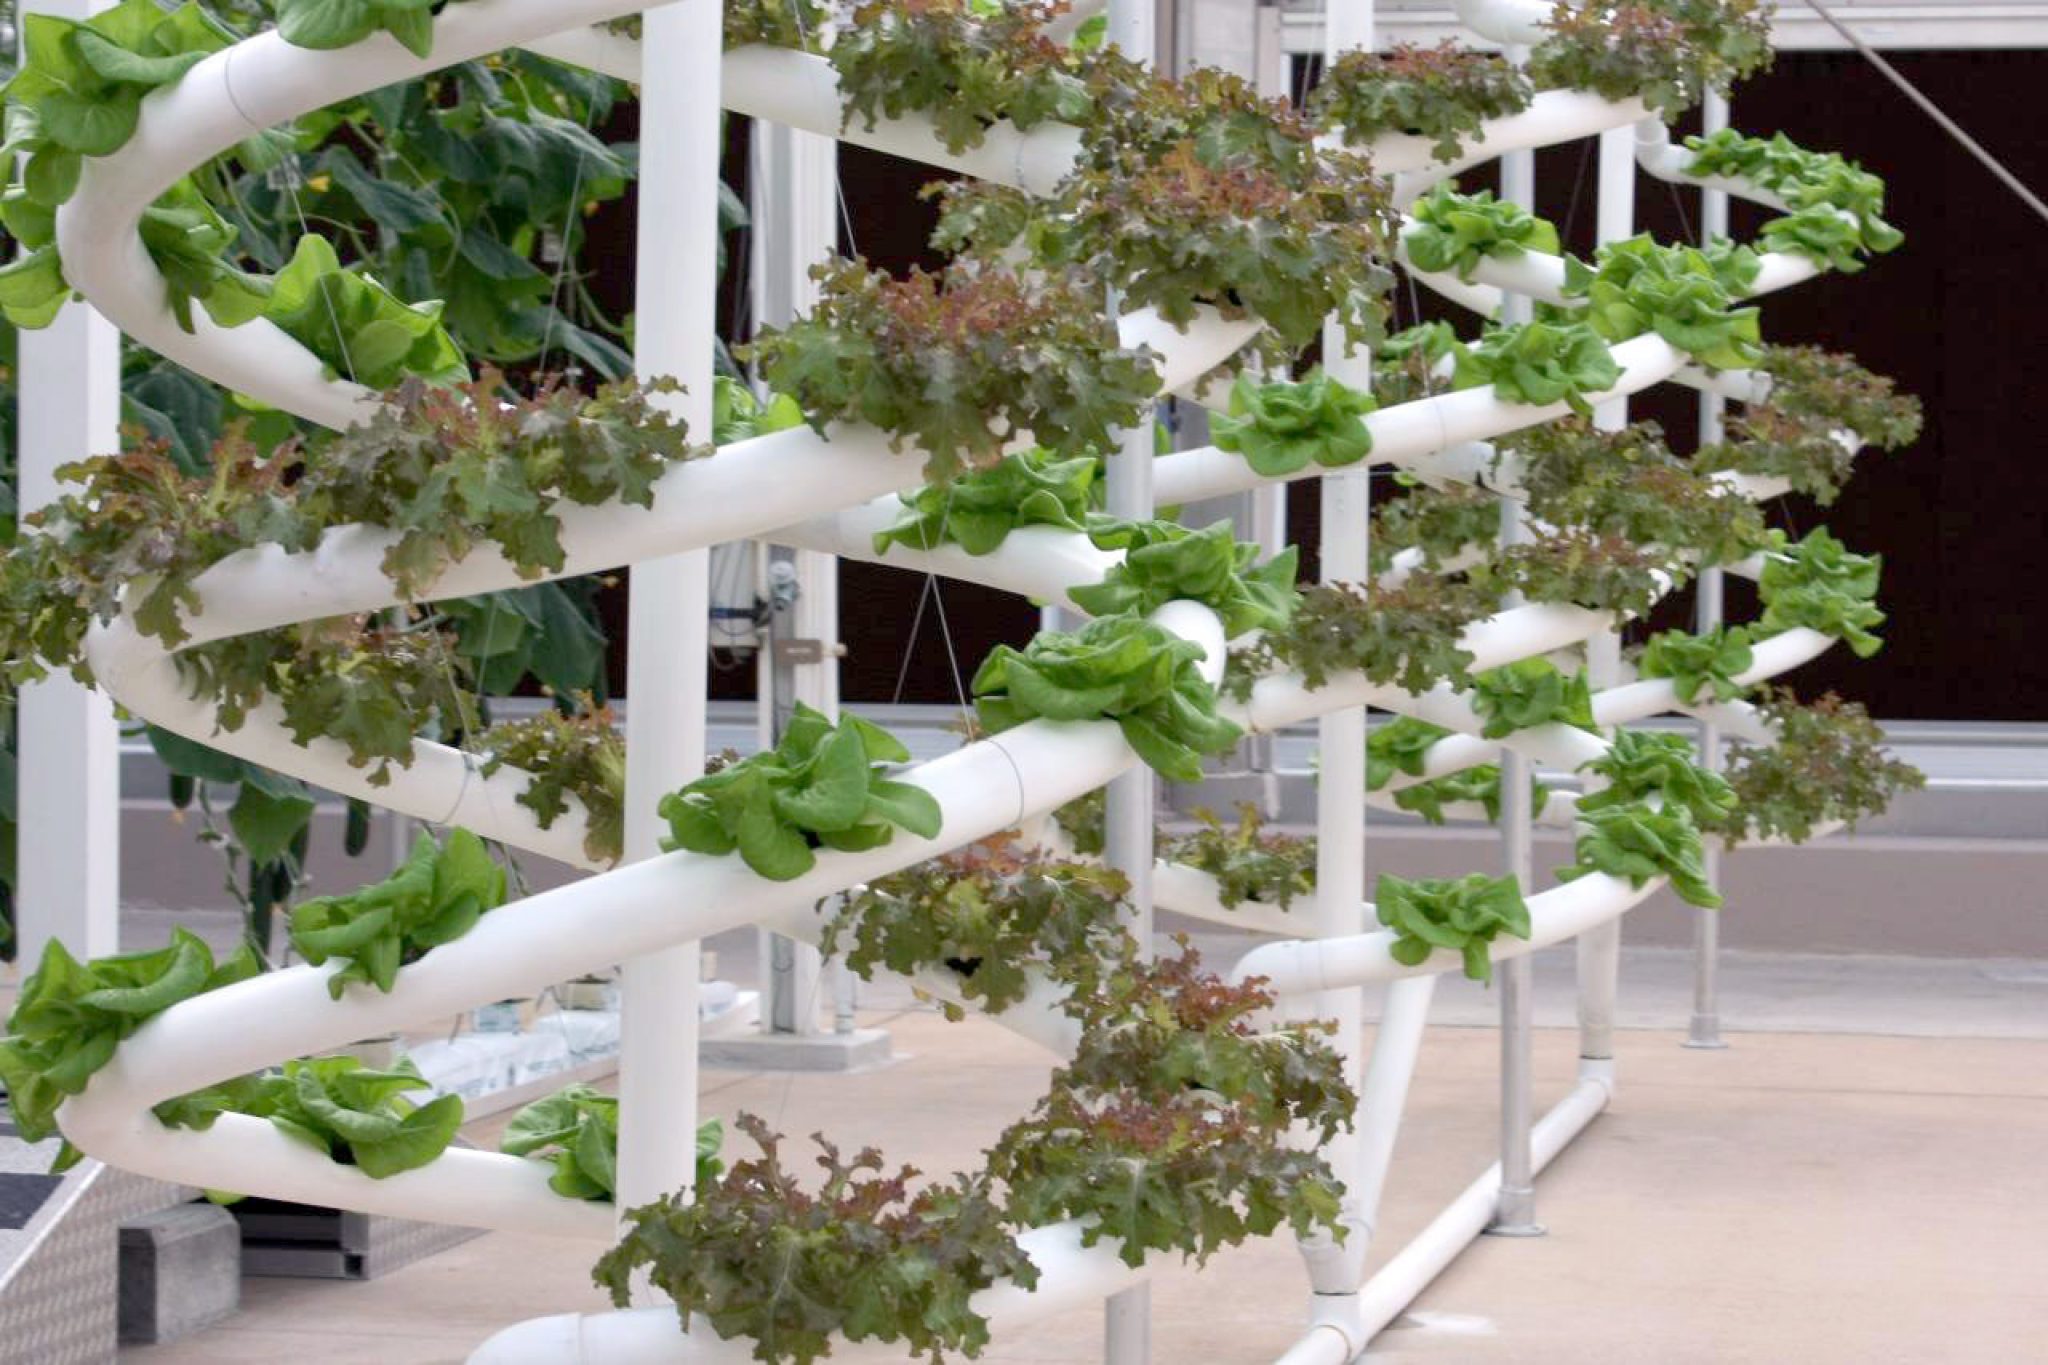 Hydroponic indoor garden hydroponics system vertical grow victory trend tech systems rayagarden